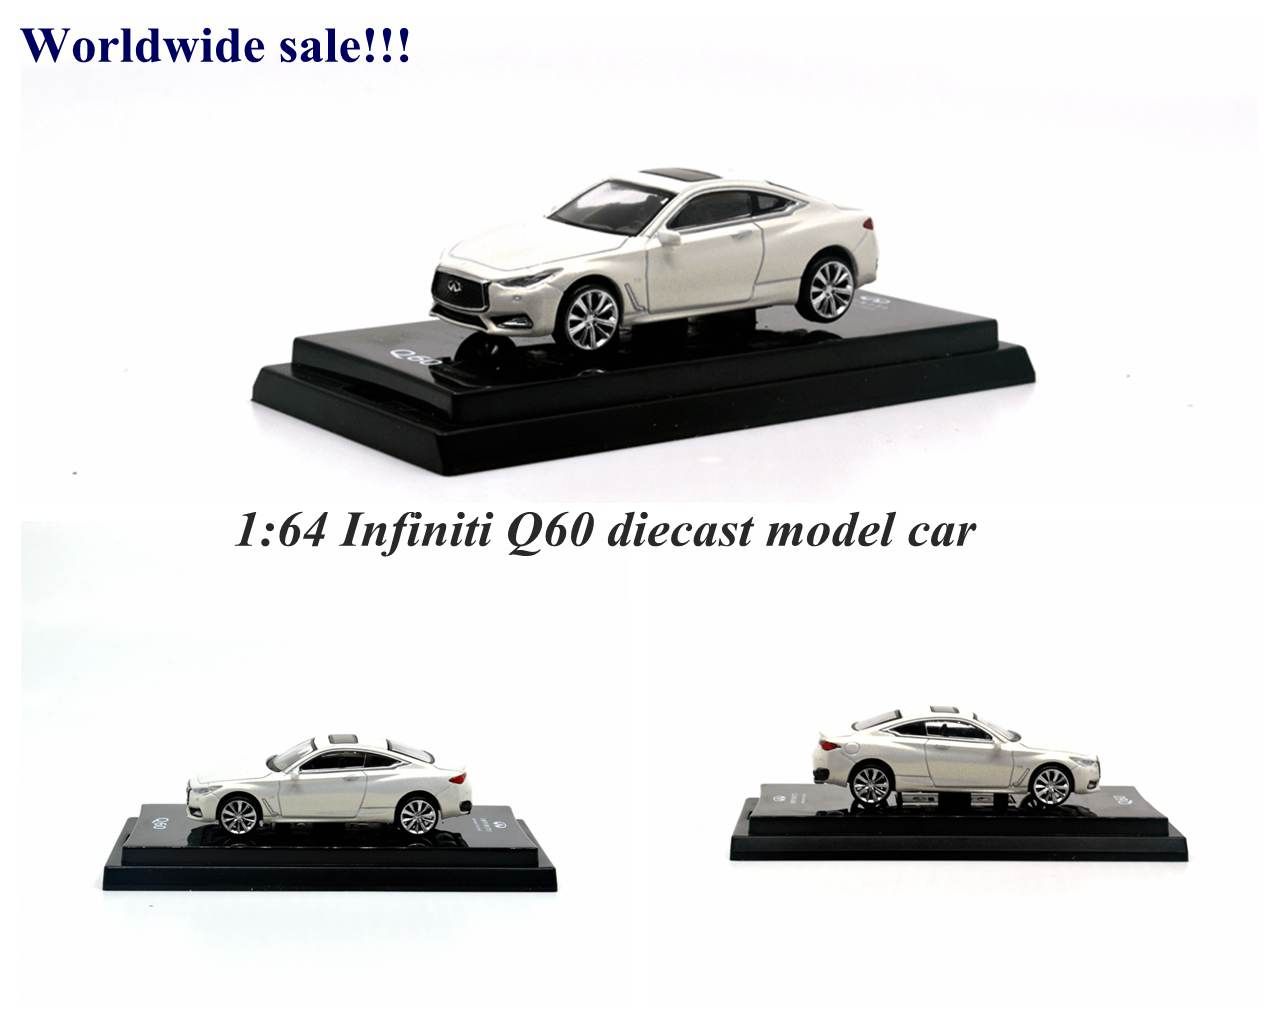 2019 1 64 Scale Infiniti Q60 Diecast Model Car White Collectable Toys Car Gift From Paudimodel 9 95 Dhgate Com